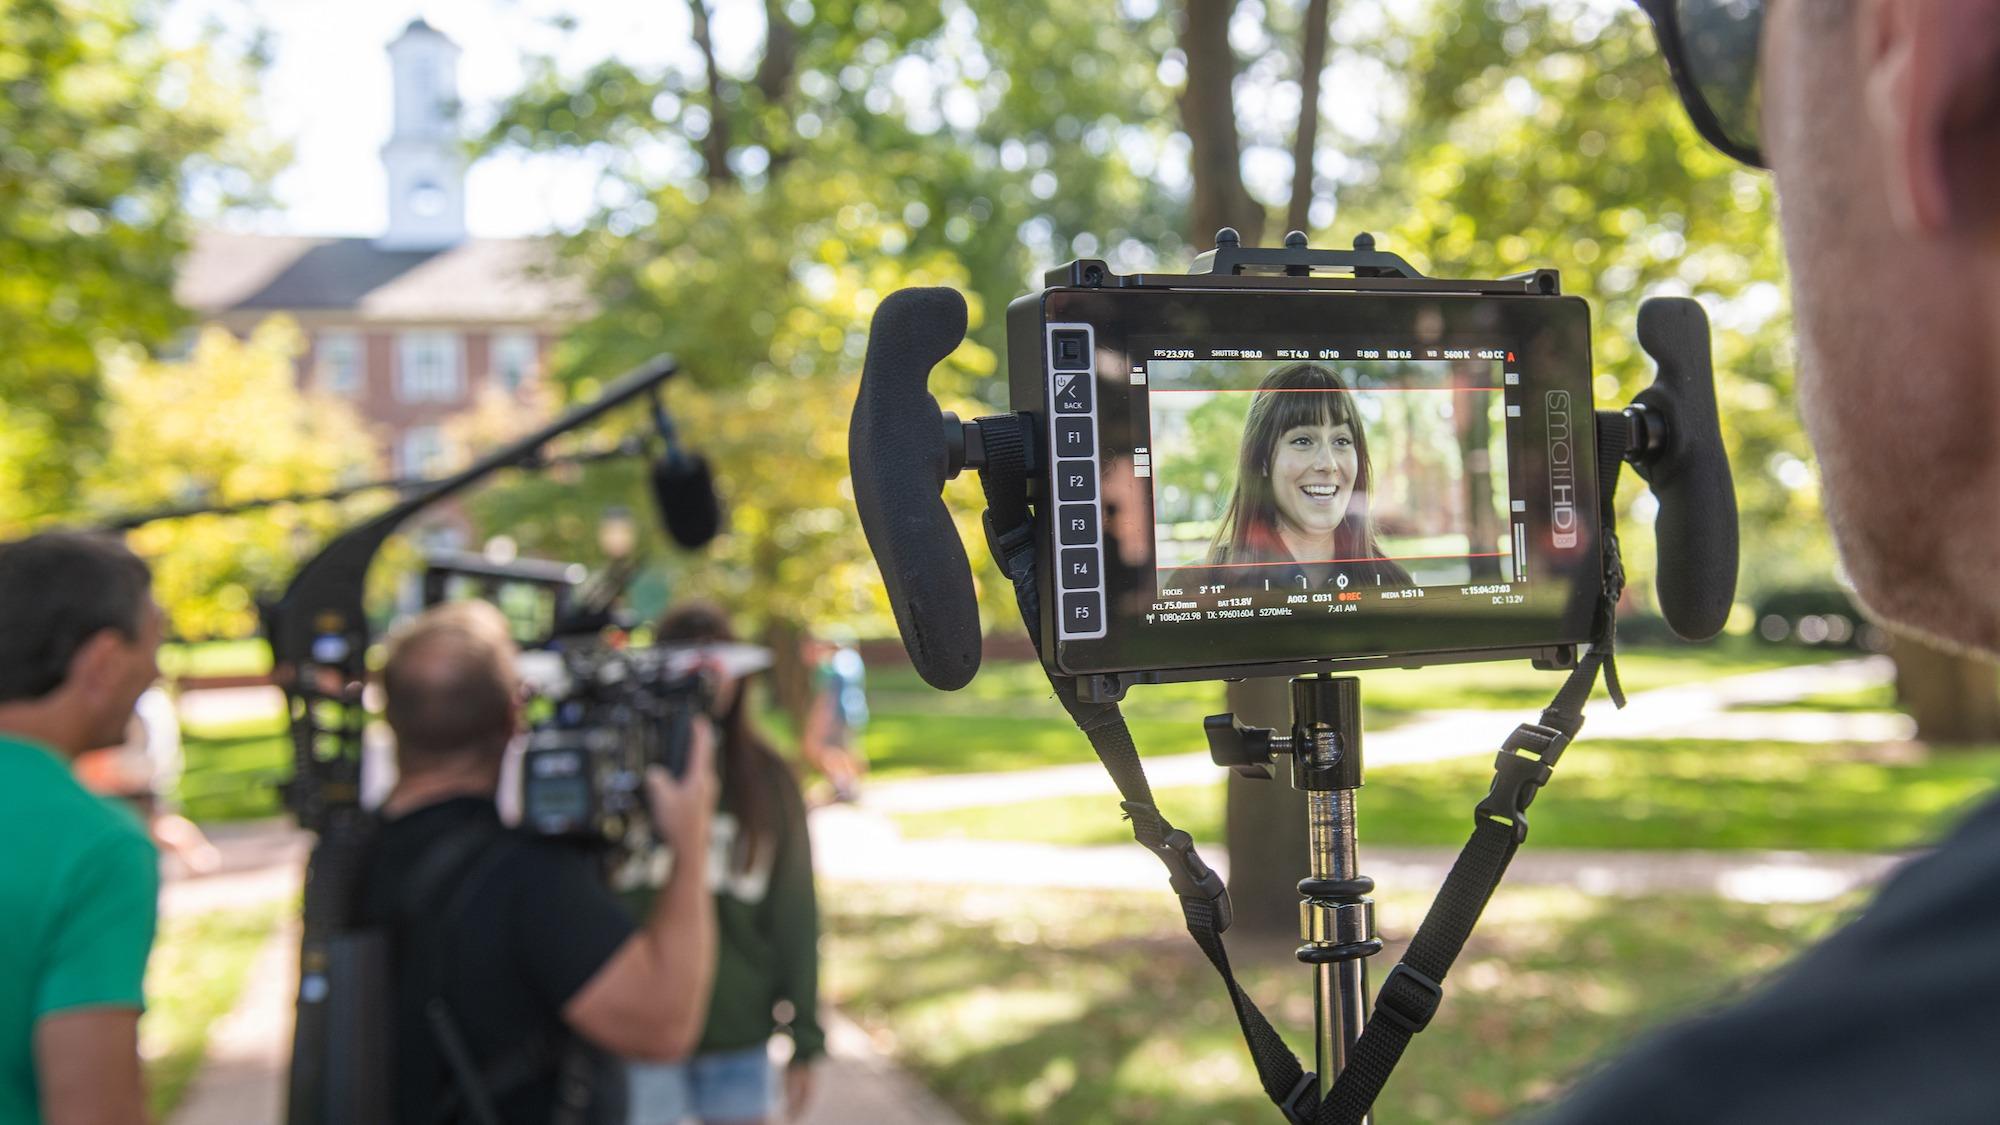 Ohio University’s historic Athens Campus was one of several Ohio locations to be featured in the state tourism’s new campaign video, “Big Moments.” Photo by Eli Burris, BSJ '16